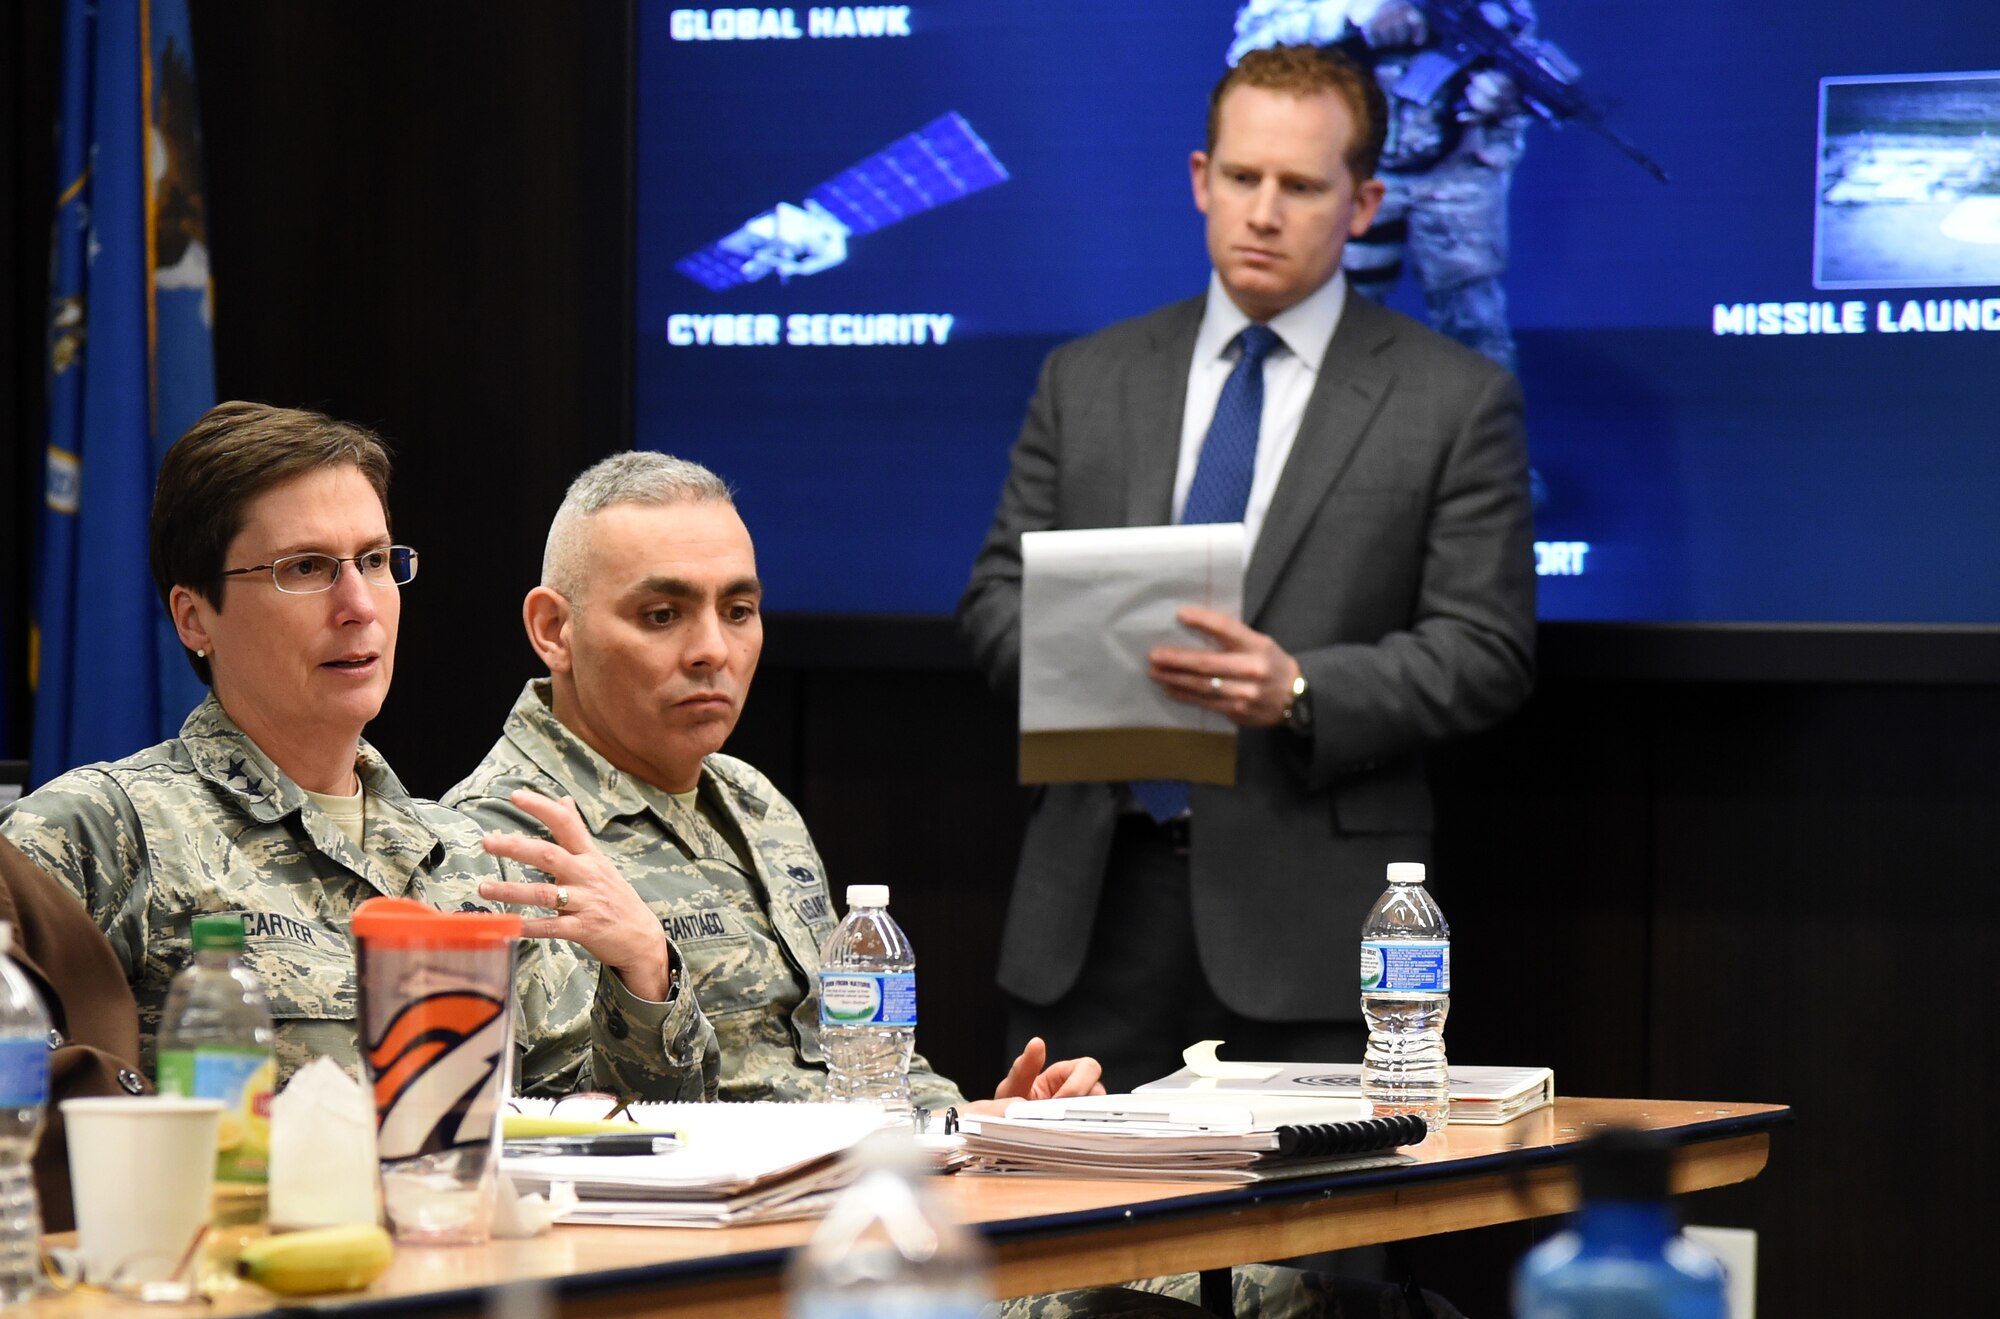 Maj. Gen. Theresa Carter, AFIMSC (Provisional) commander, addresses attendees at the AFIMSC leadership meeting Feb. 12 at Joint Base Andrews, Maryland. (U.S. Air Force photo by Airman 1st Class Philip Bryant)